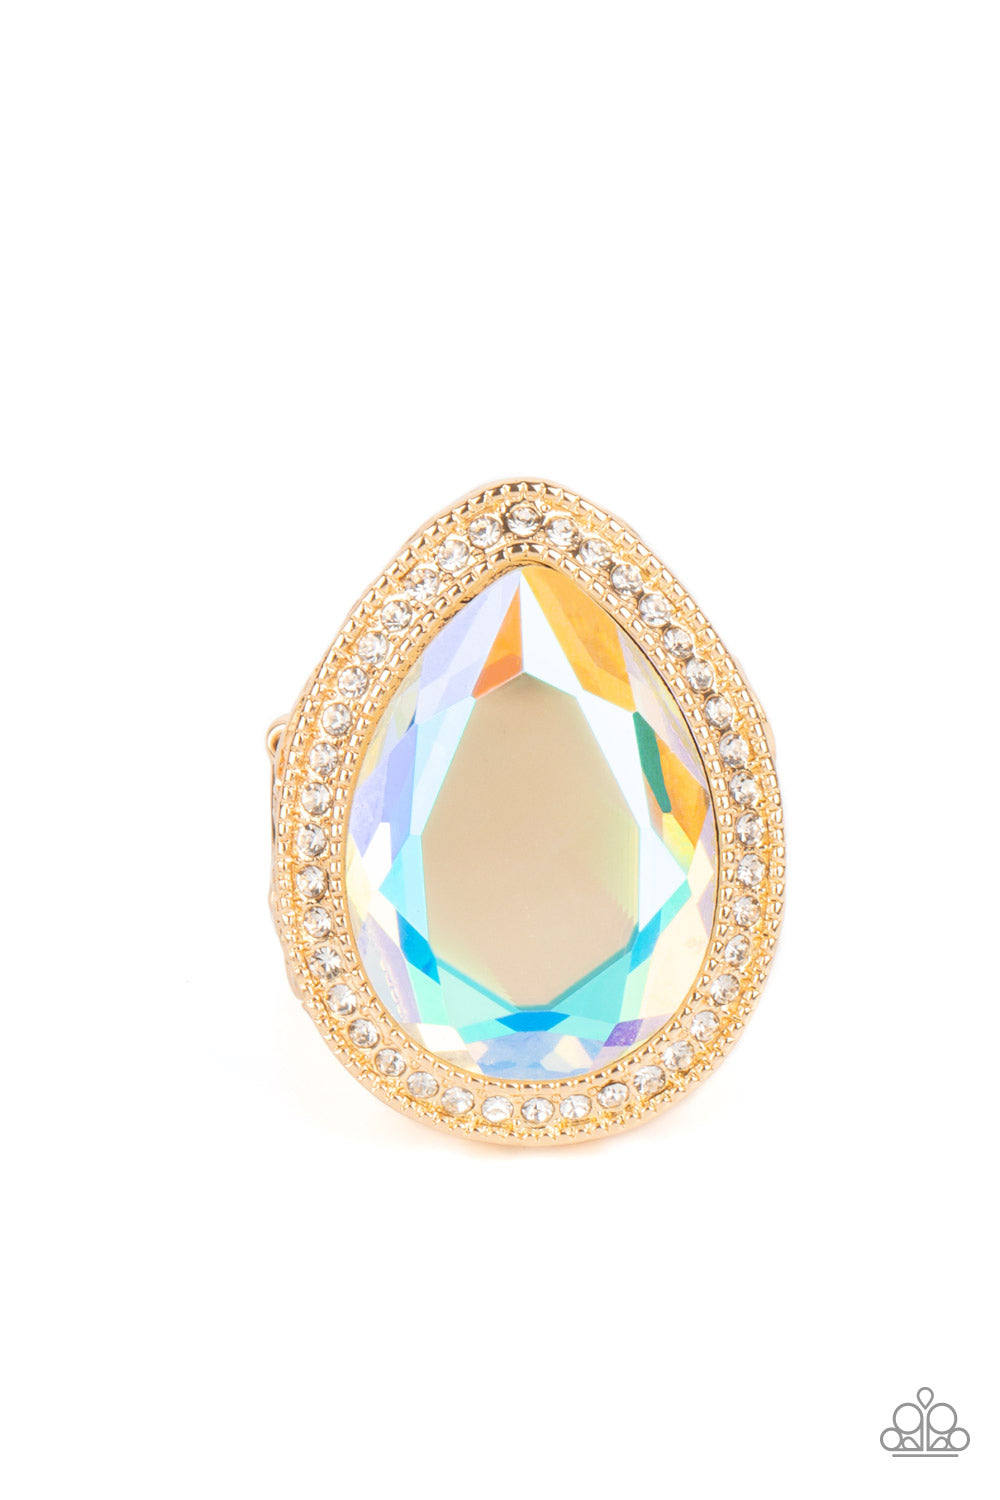 Paparazzi Accessories - Illuminated Icon - Gold Life of the Party Rings an oversized teardrop gem with an iridescent finish is nestled inside a gold teardrop frame encrusted in dainty white rhinestones. Airy teardrop cutouts decorate each side of the oversized frame, some with subtle texture and others with a high sheen finish. Features a stretchy band for a flexible fit. Due to its prismatic palette, color may vary.  Sold as one individual ring.